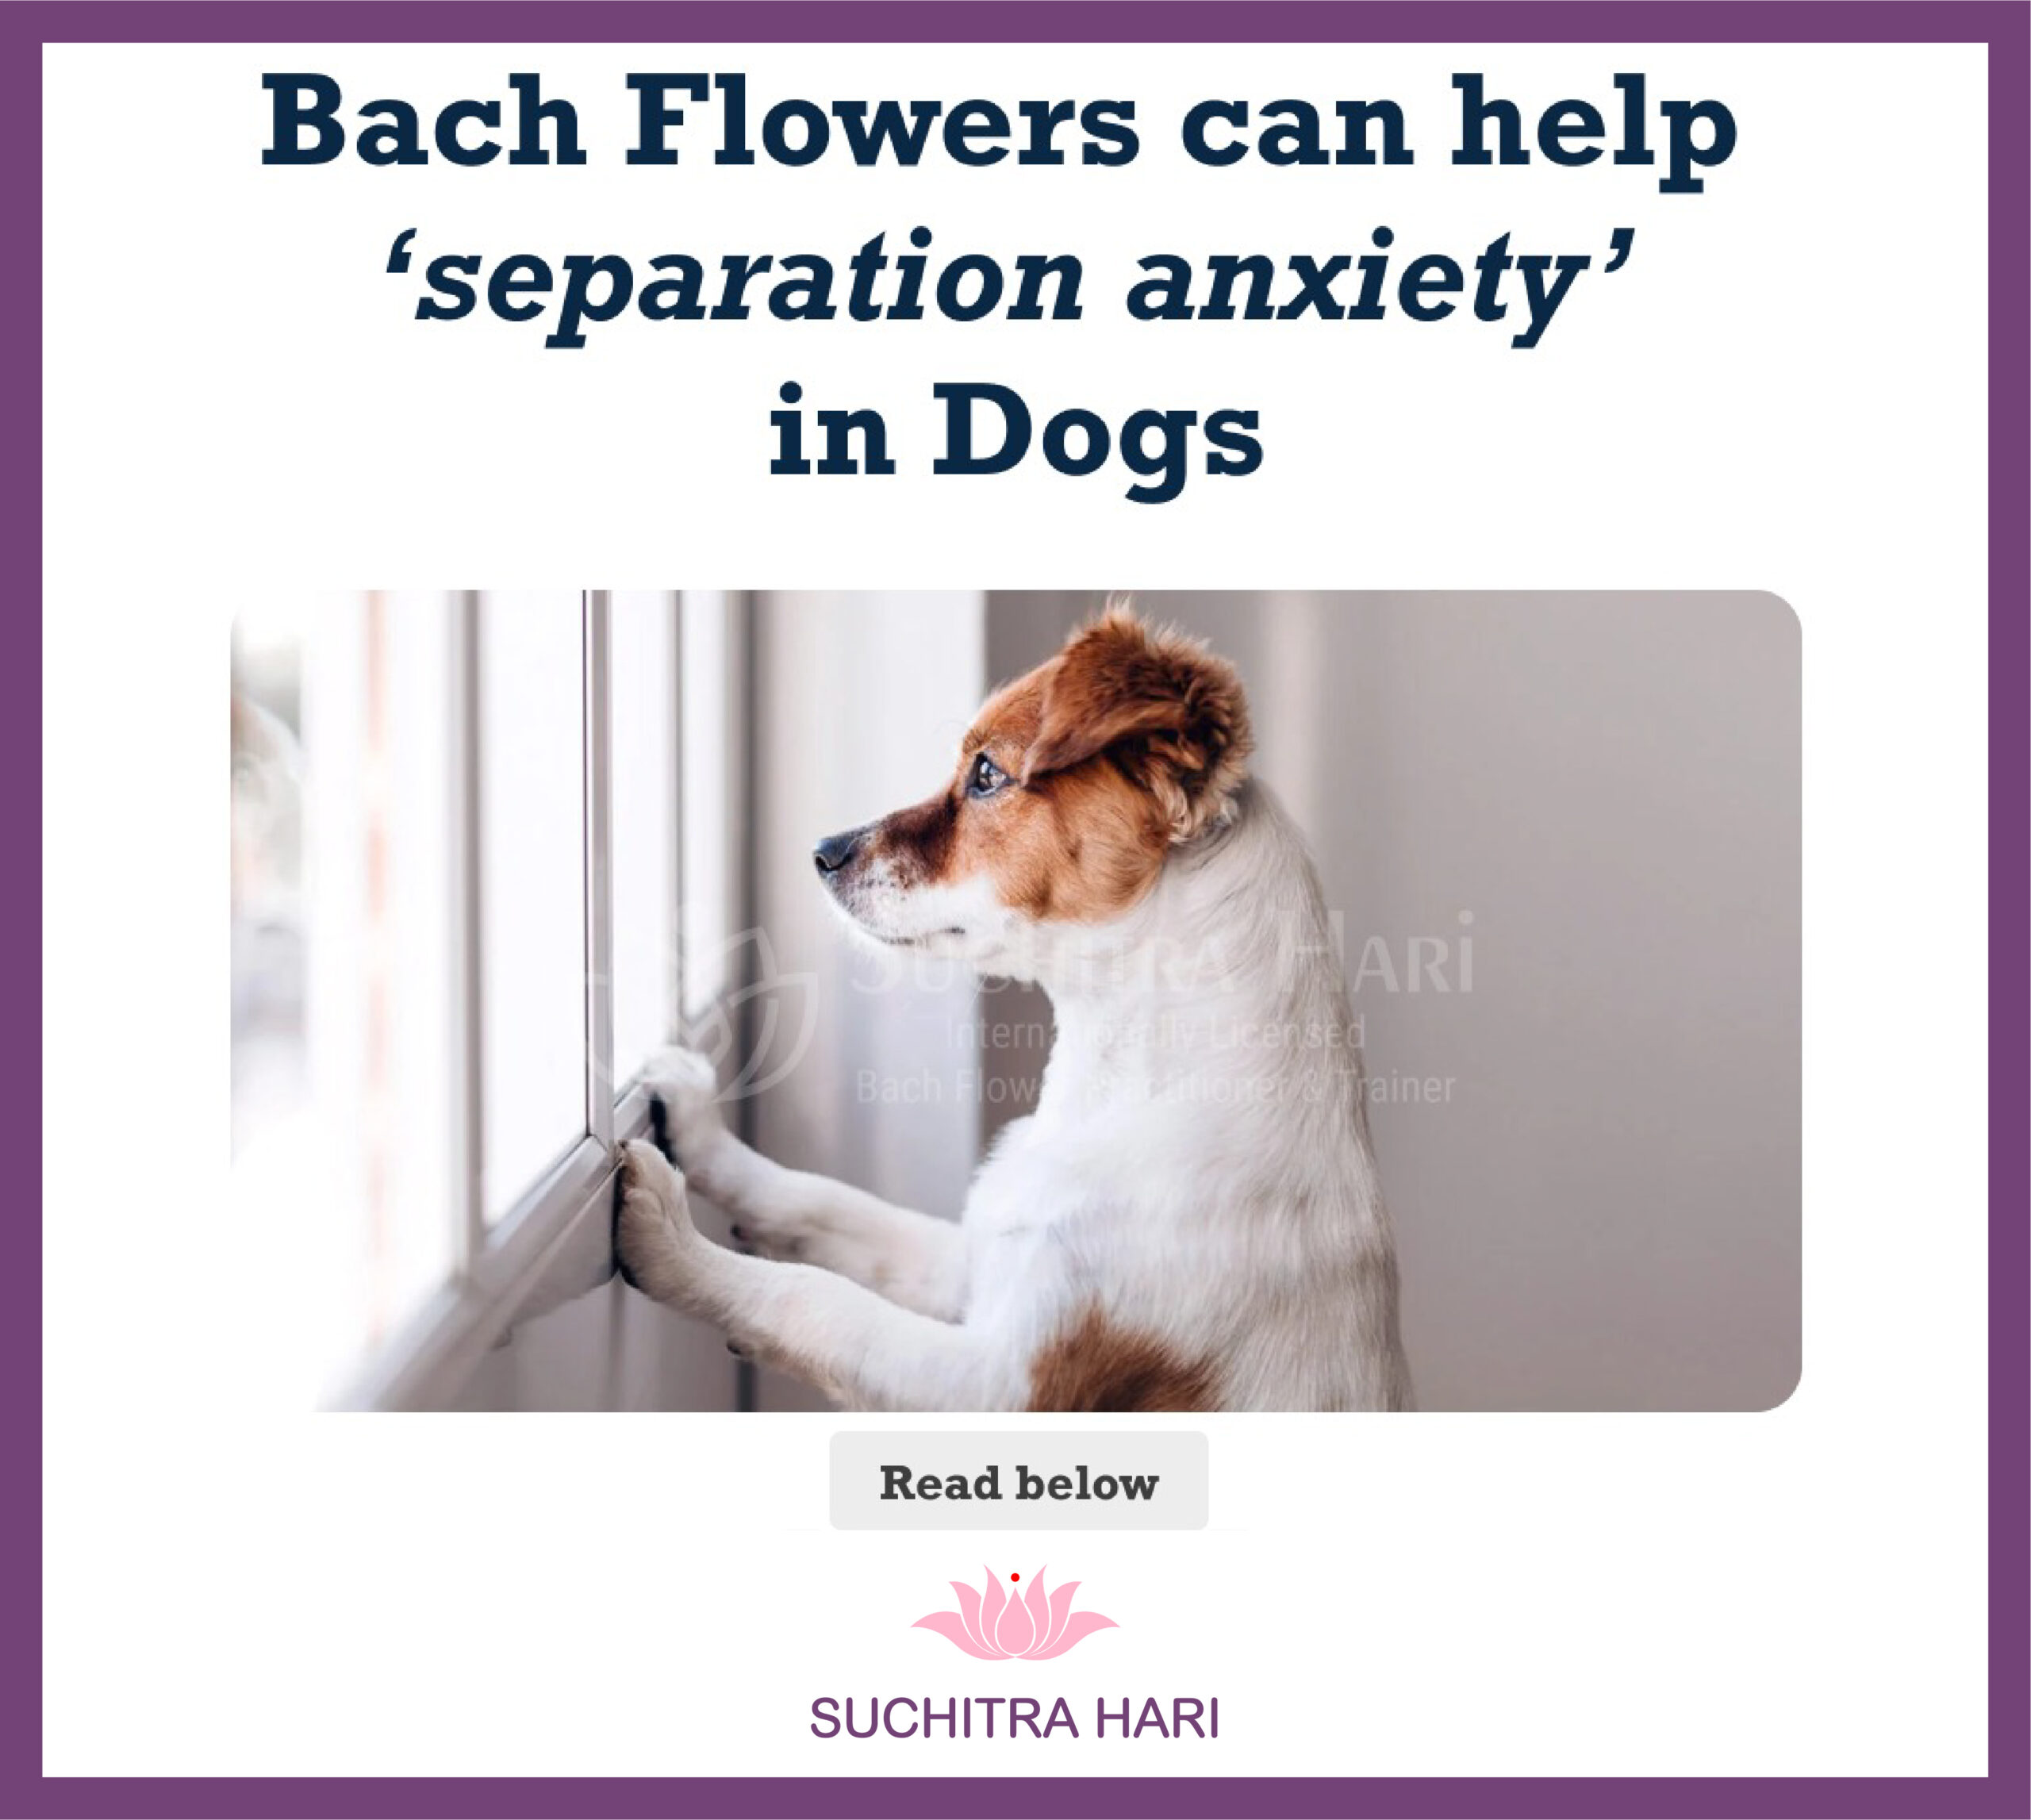 Bach Flowers can help separation anxiety in Dogs